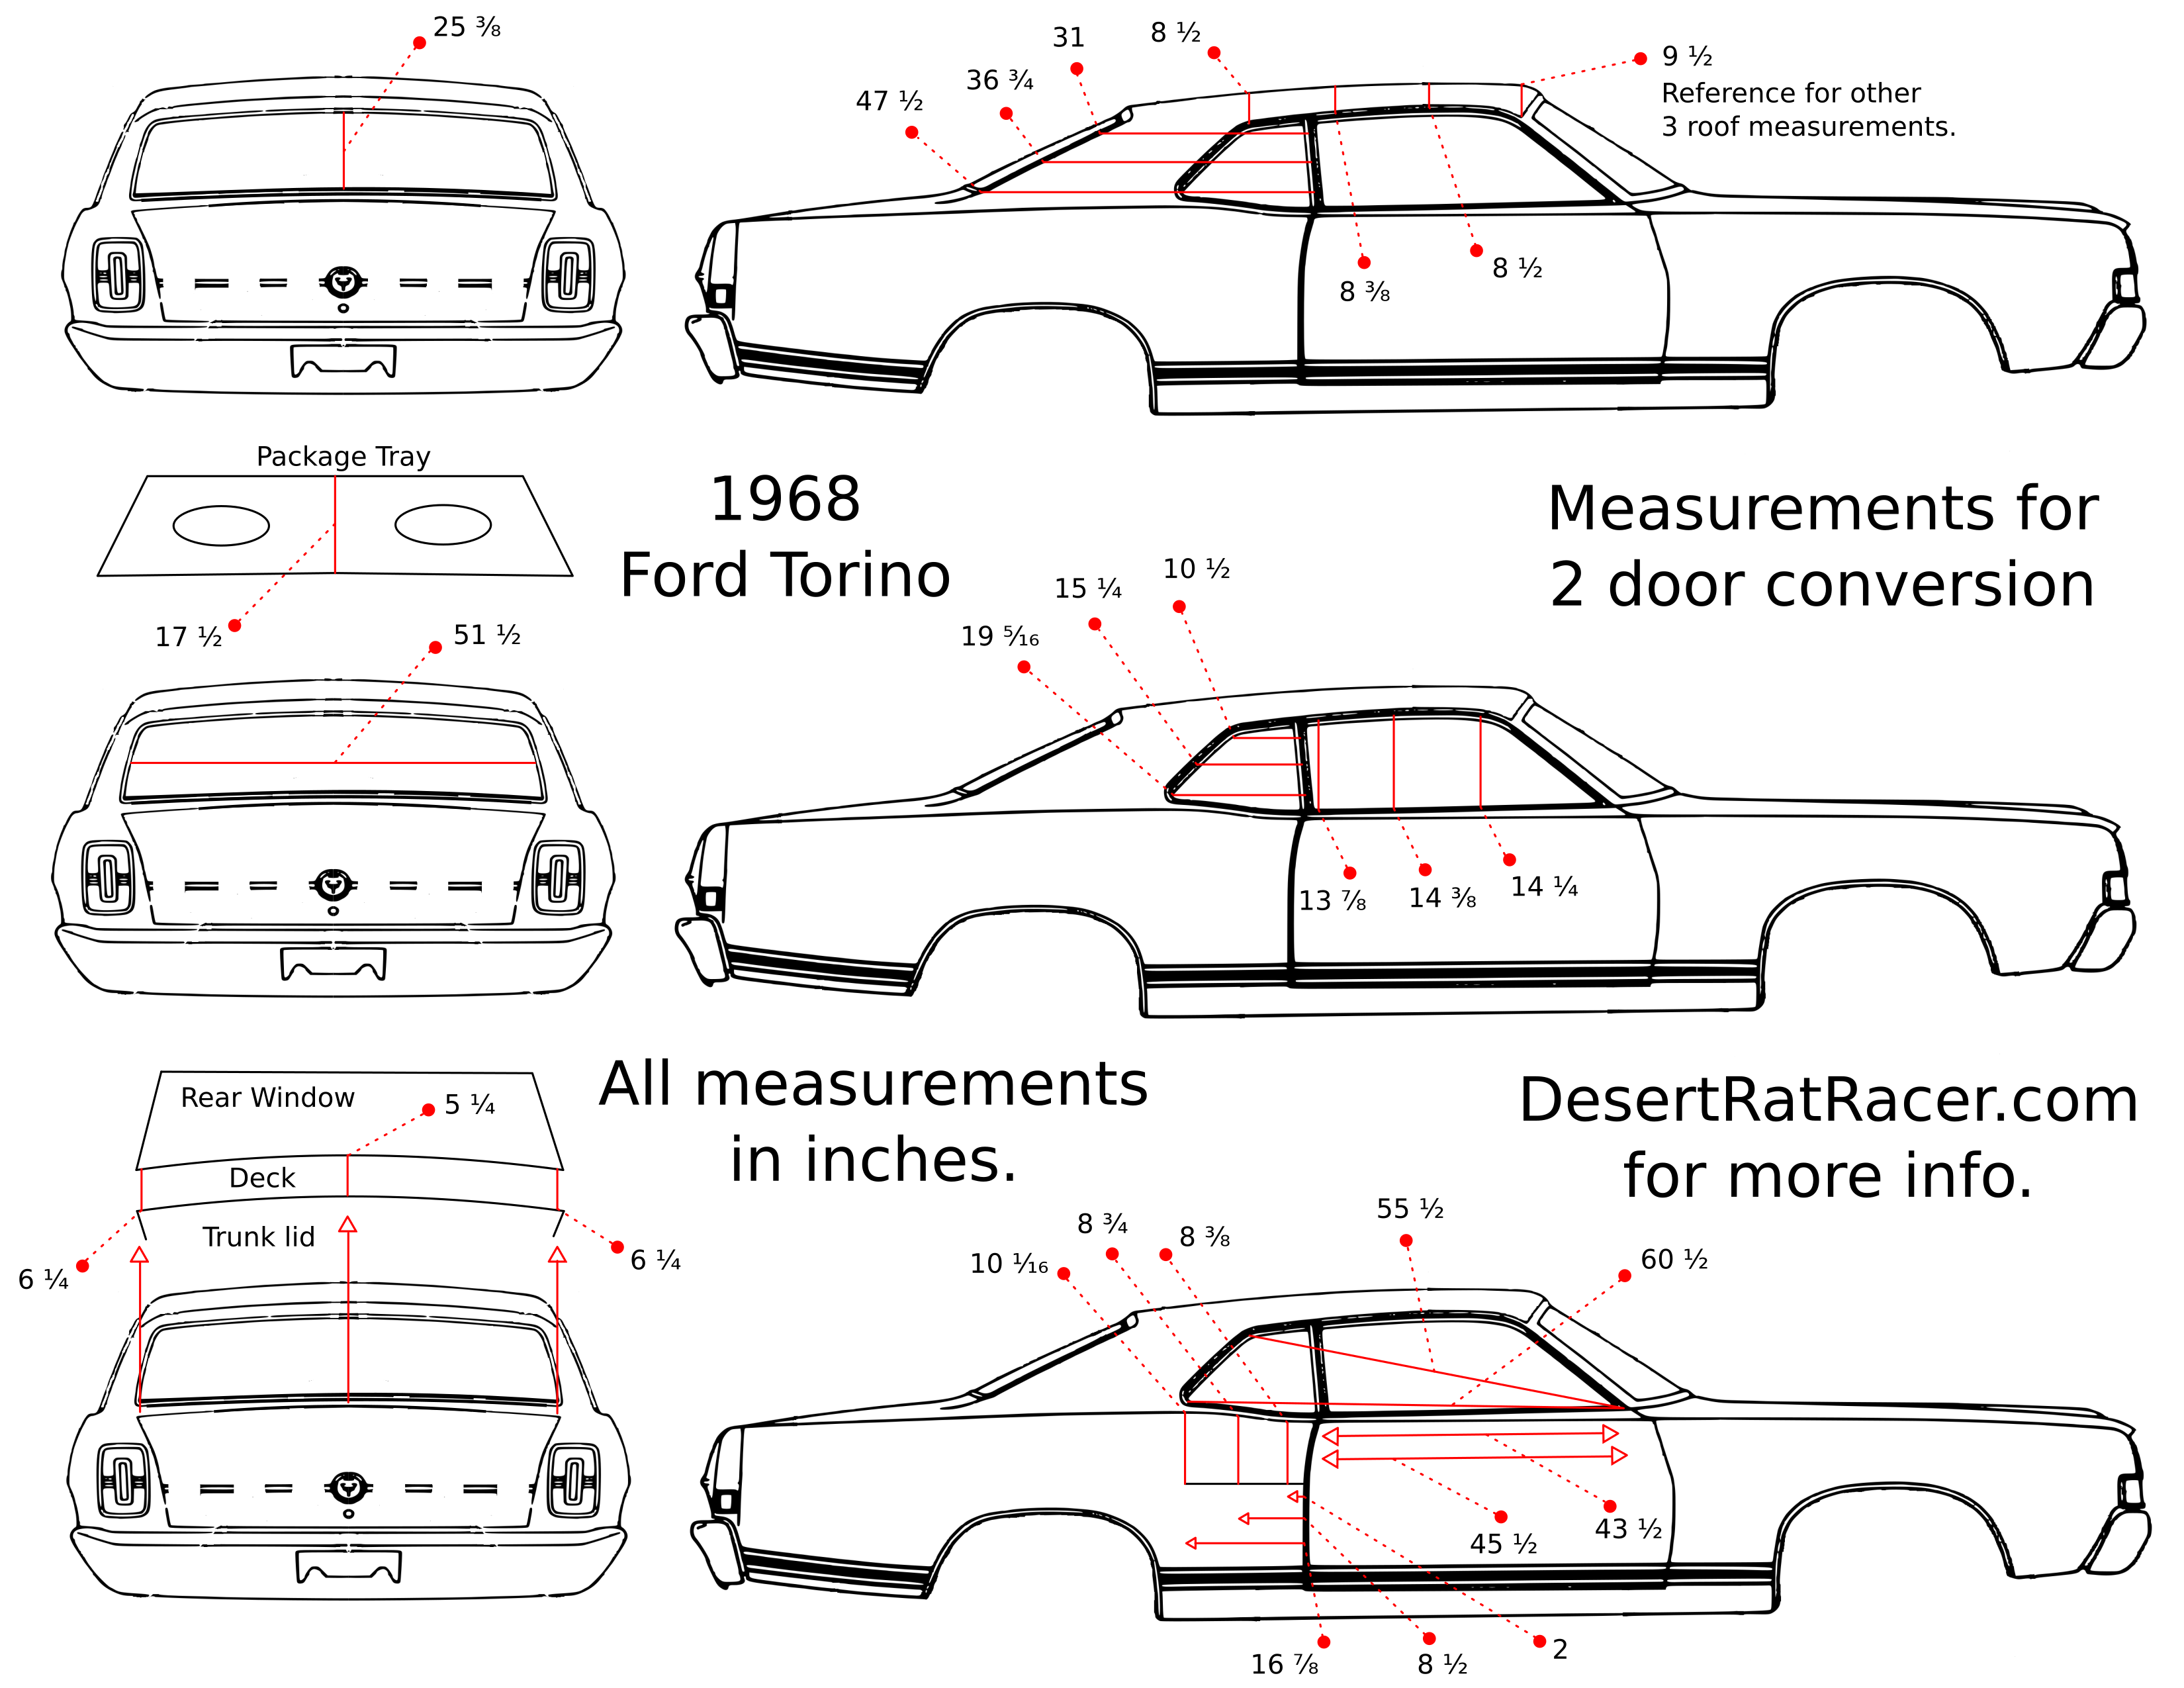 1968 ford torino measurements for 2 door conversions